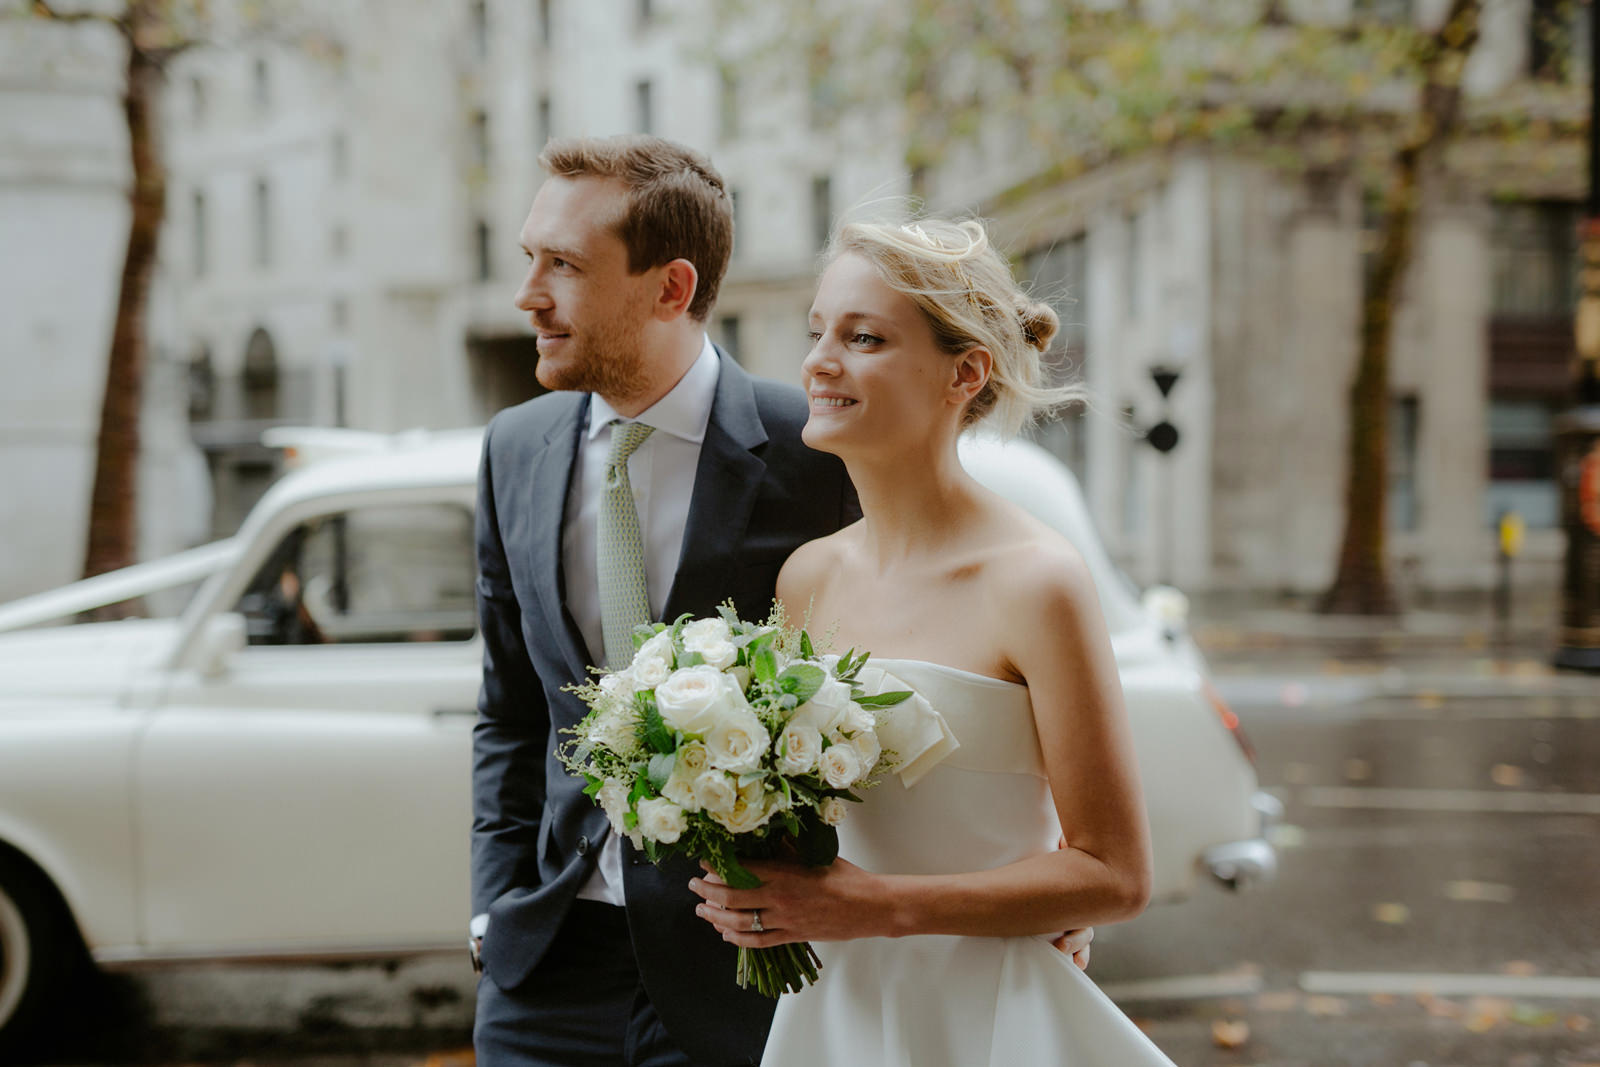 An intimate and elegant city winter wedding in London